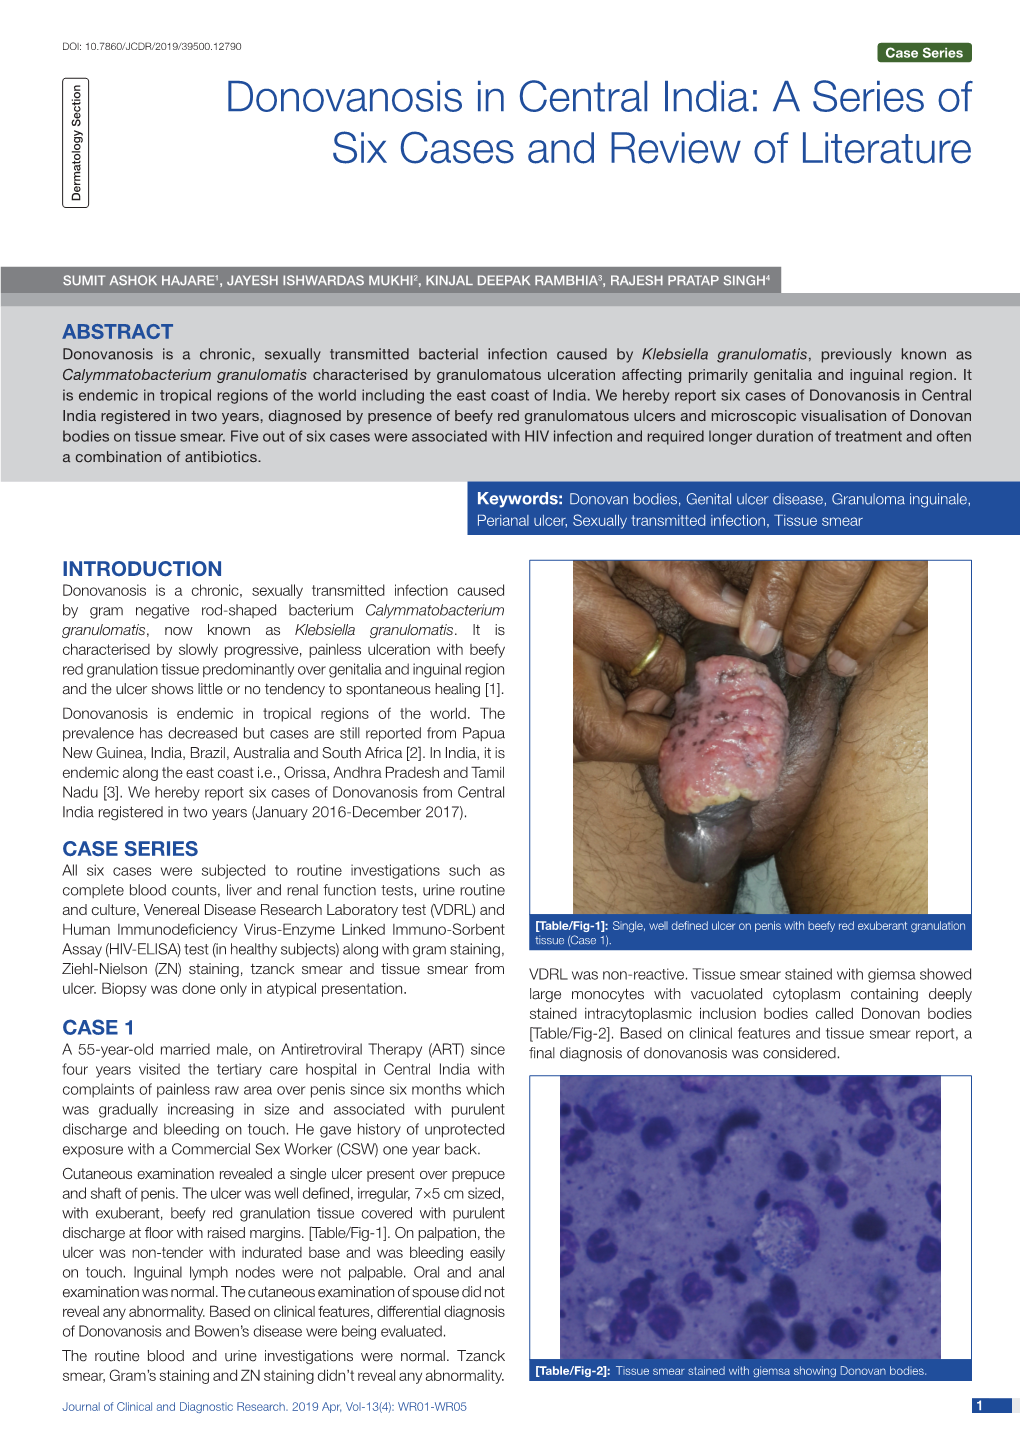 Donovanosis in Central India: a Series of Postgraduate Education Six Cases and Review of Literature Original Article Dermatology Section